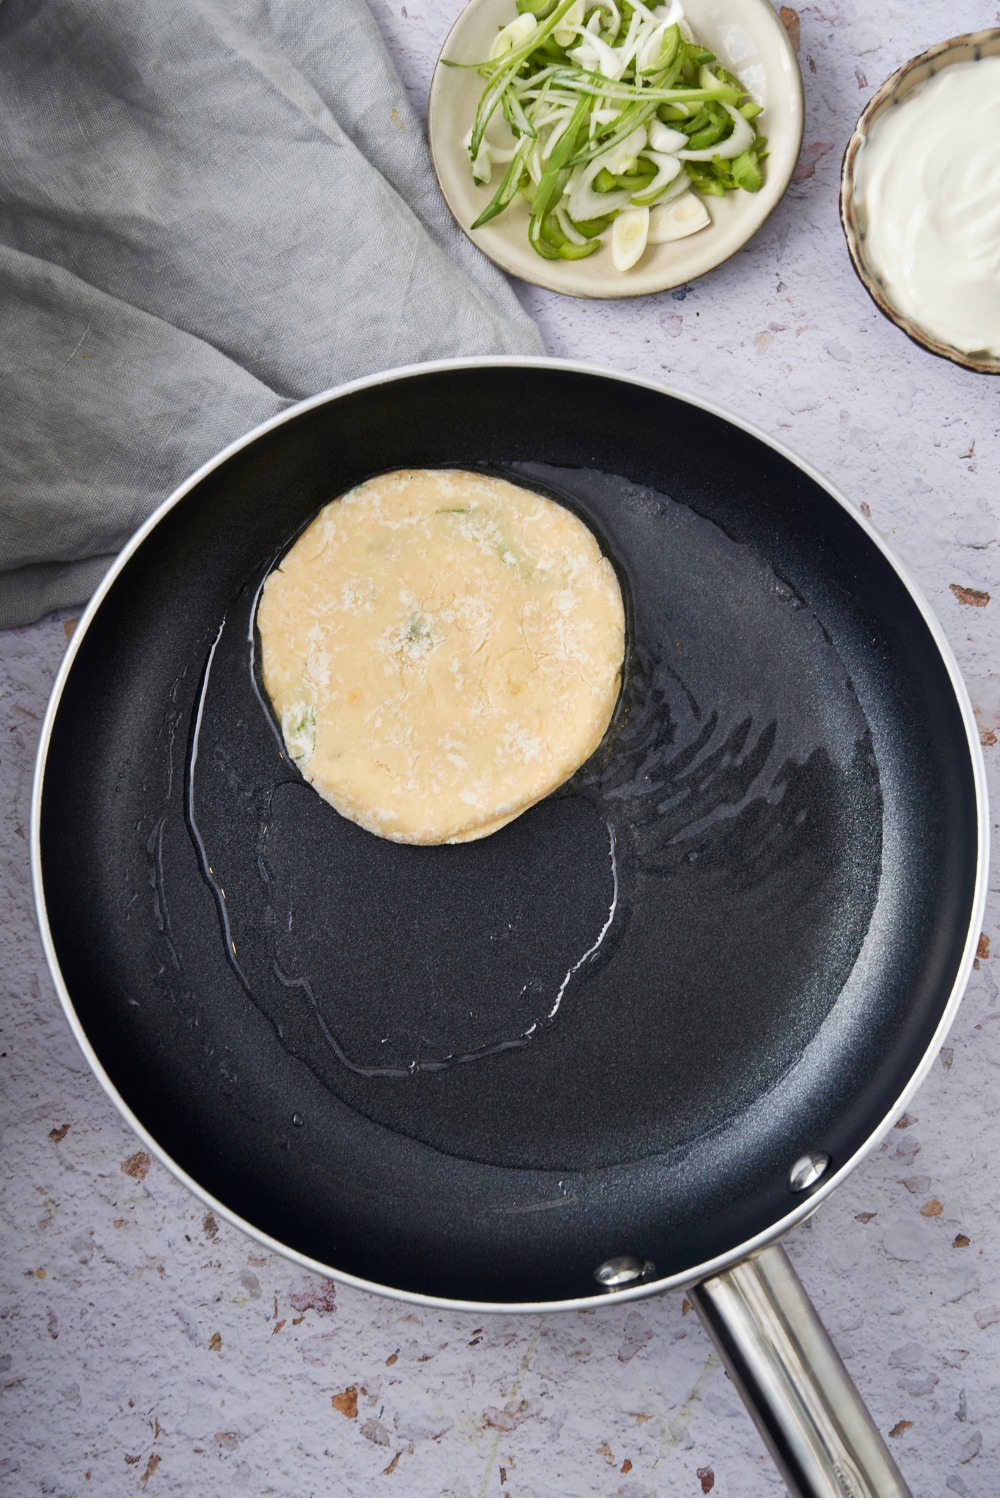 One mashed potato pancake in a frying pan with oil.